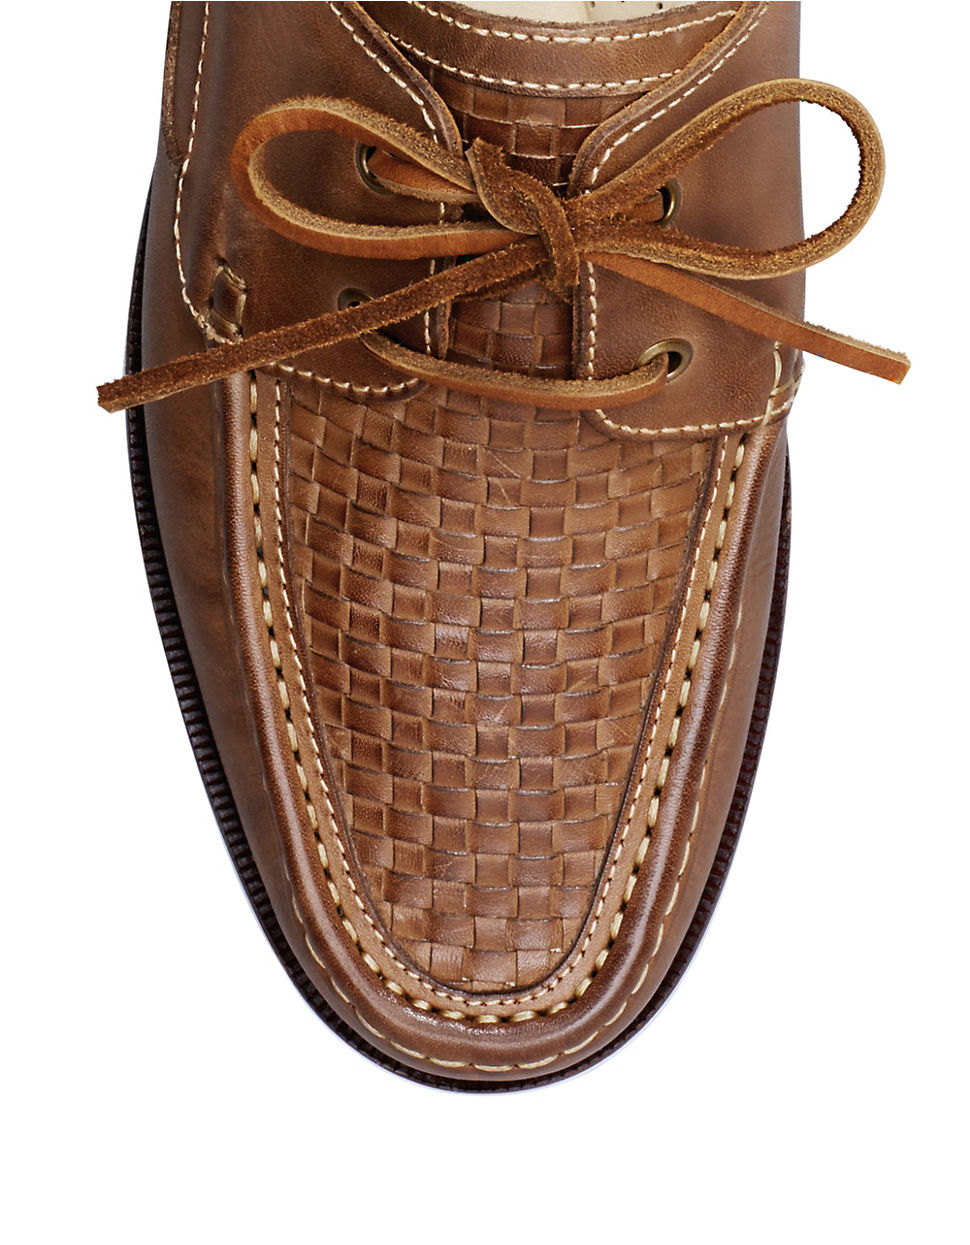 Lyst - Tommy Bahama Baldwin Boat Shoes in Brown for Men